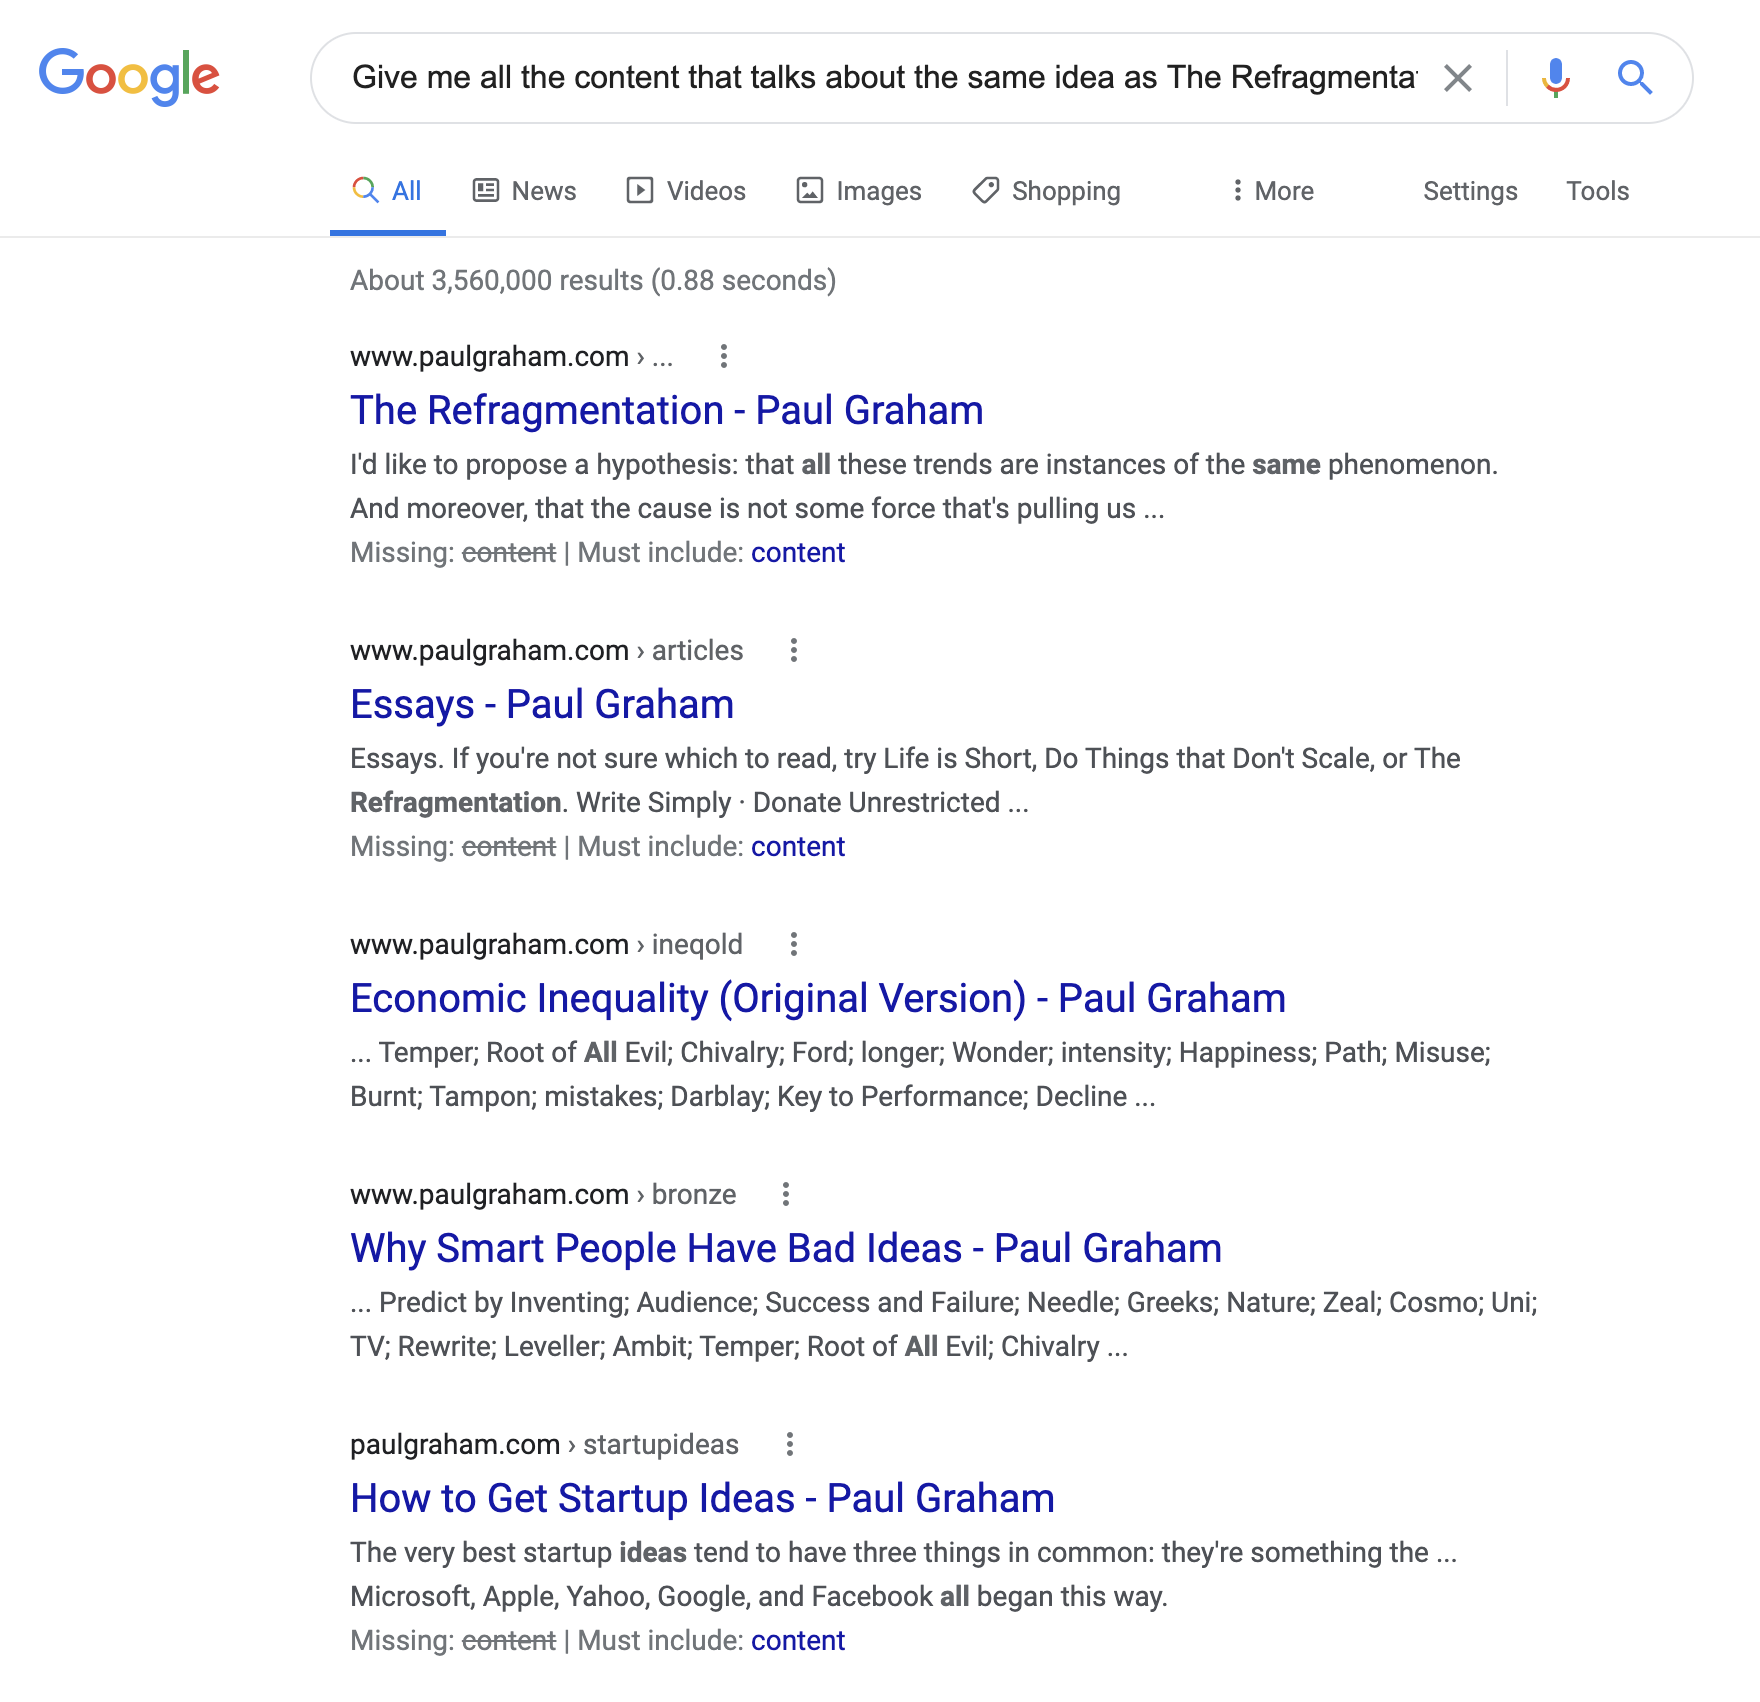 Google Query “Give me all the content that talks about the same idea as The Refragmentation by Paul Graham”